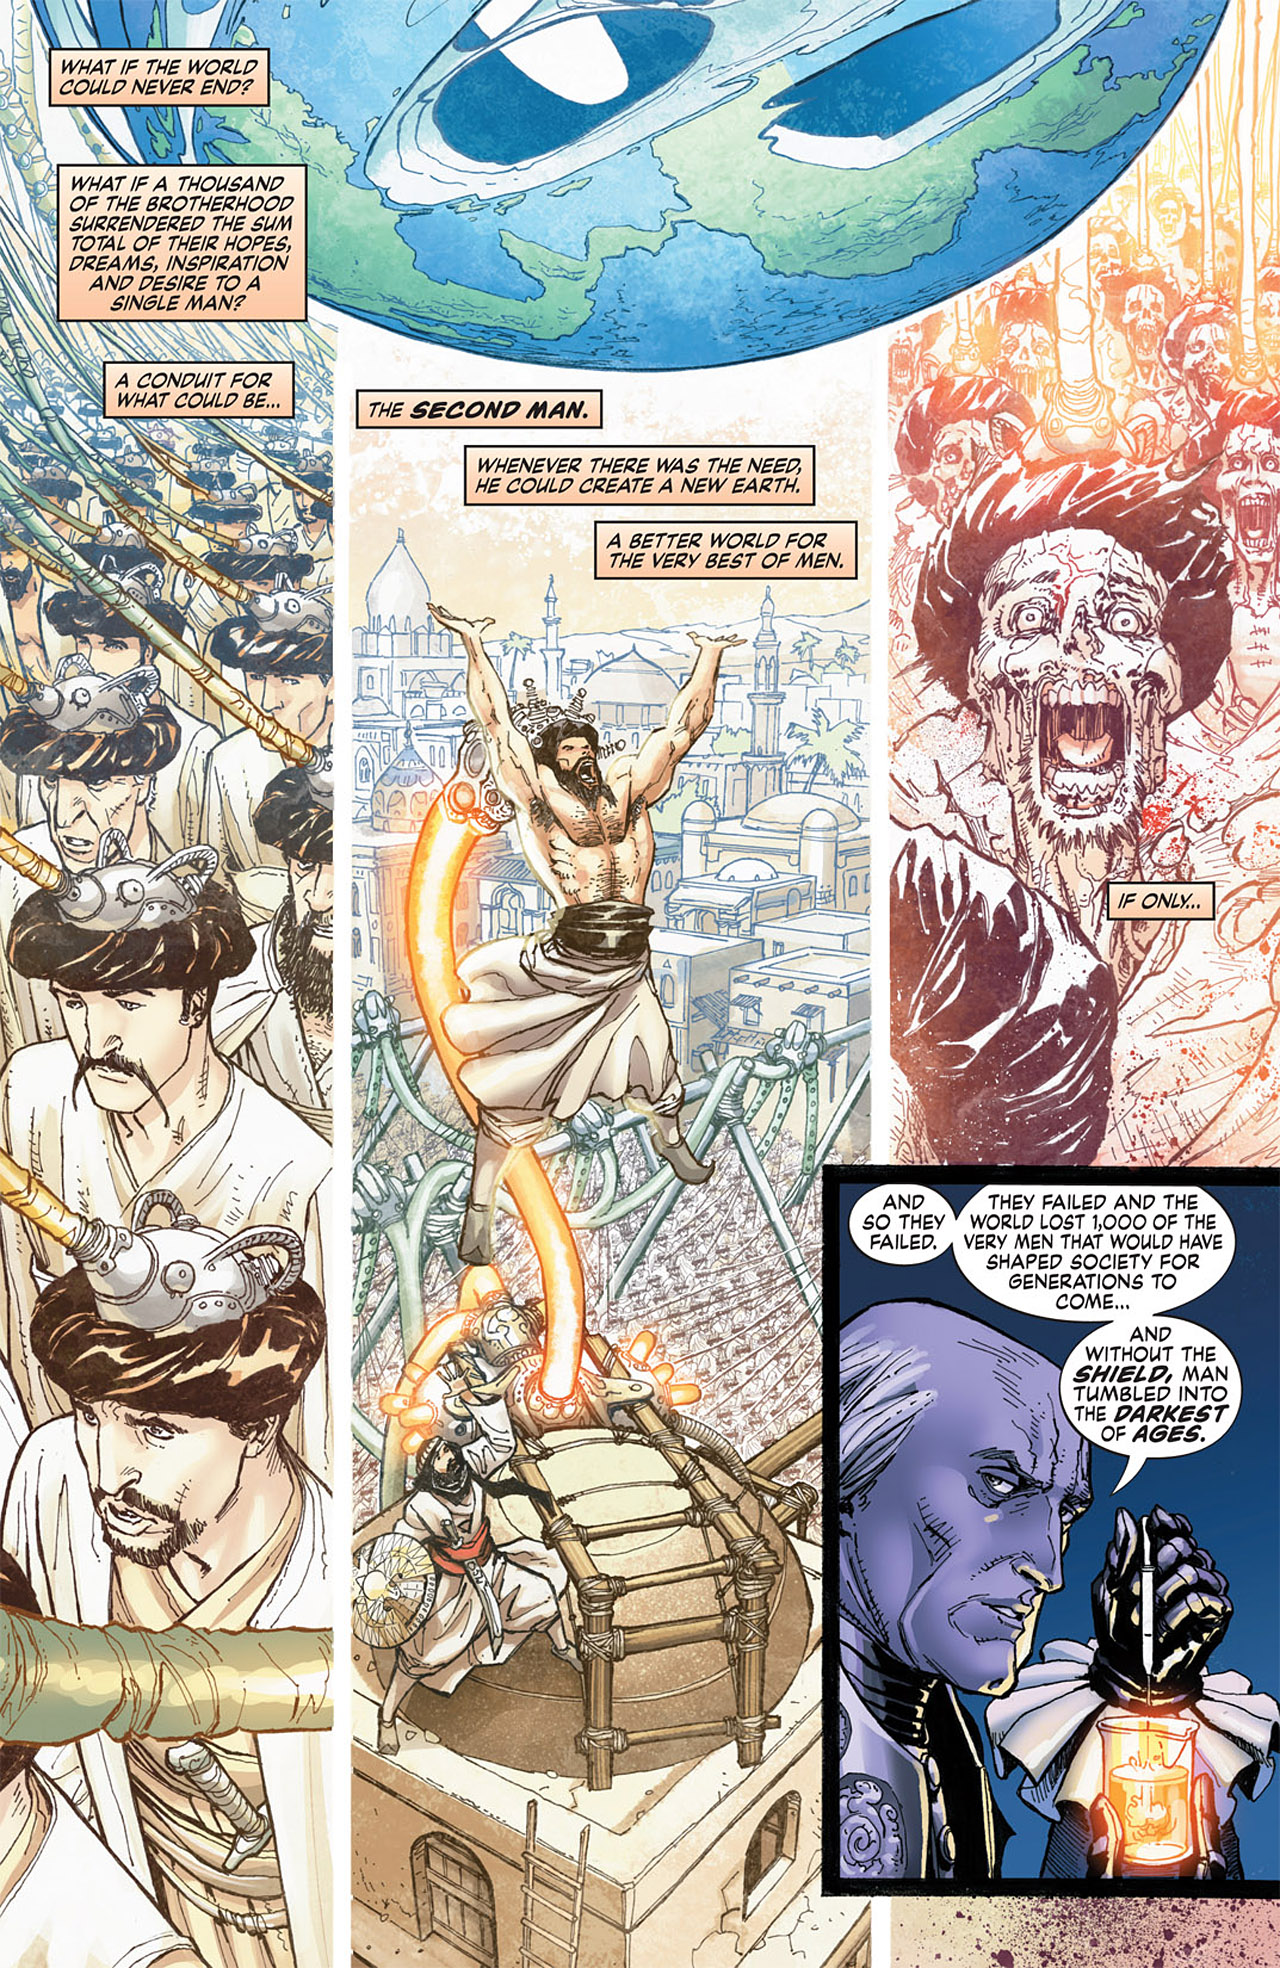 S.H.I.E.L.D. (2010) Issue #3 #4 - English 9